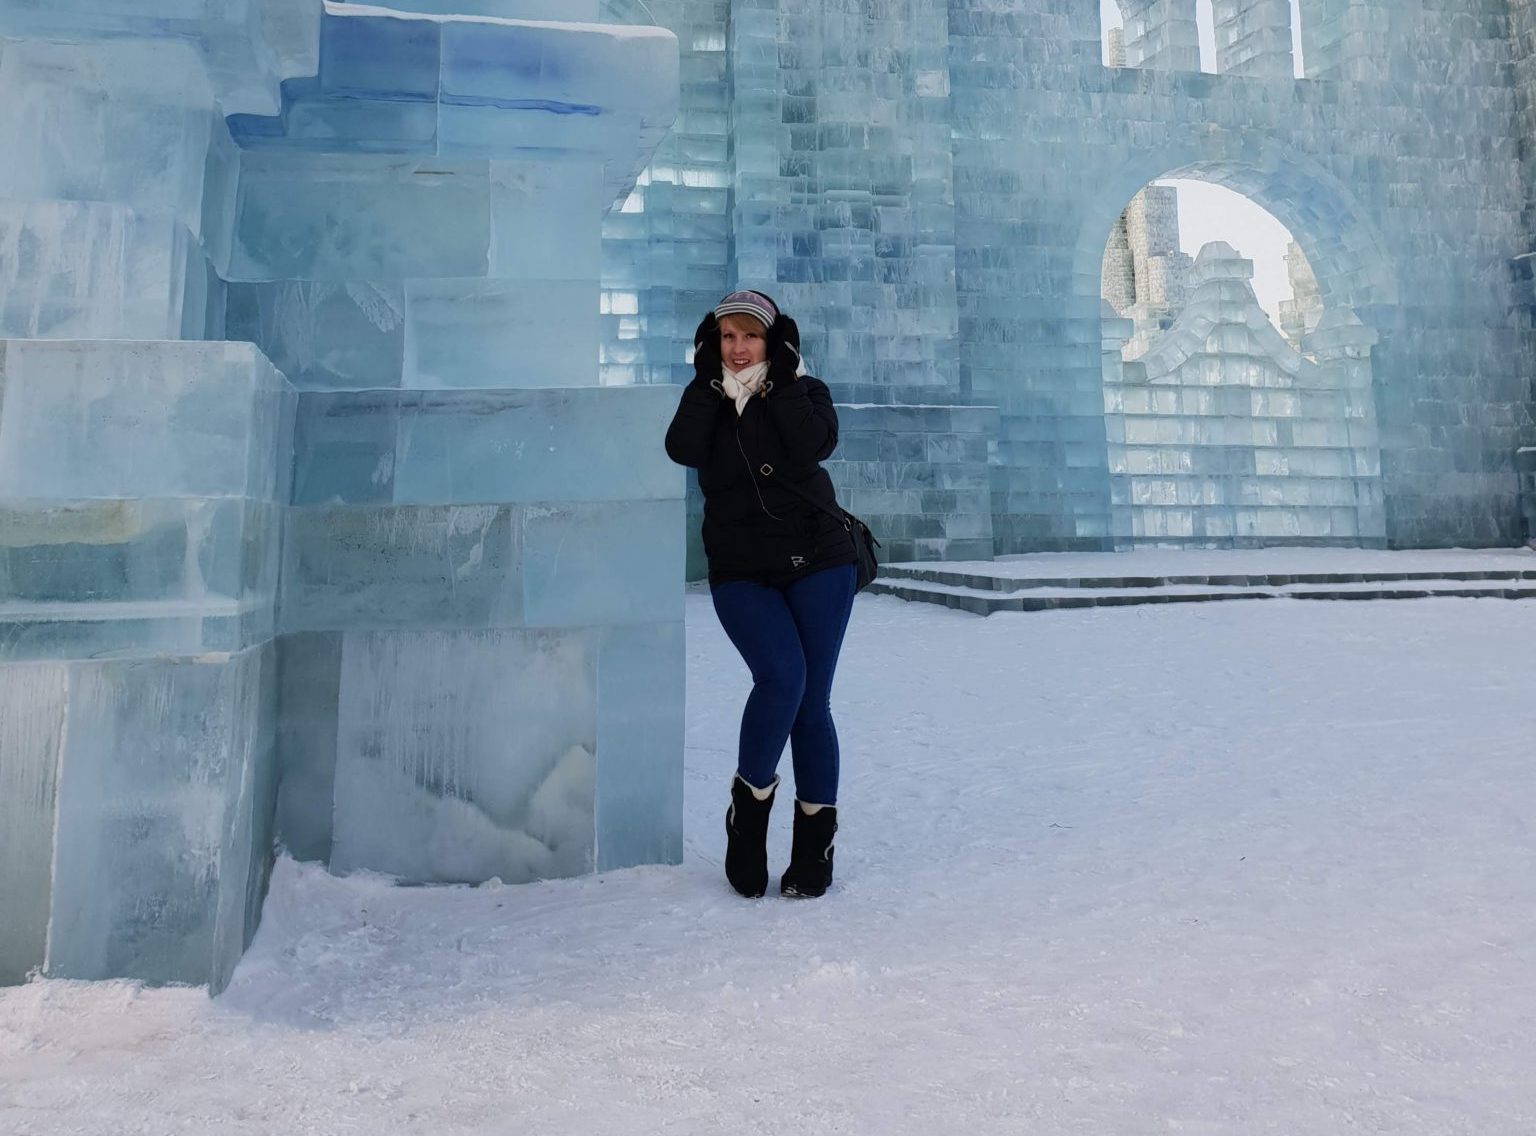 Rosie leans against an ice building wearing a coat and earmuffs at Harbin Snow and Ice Festival